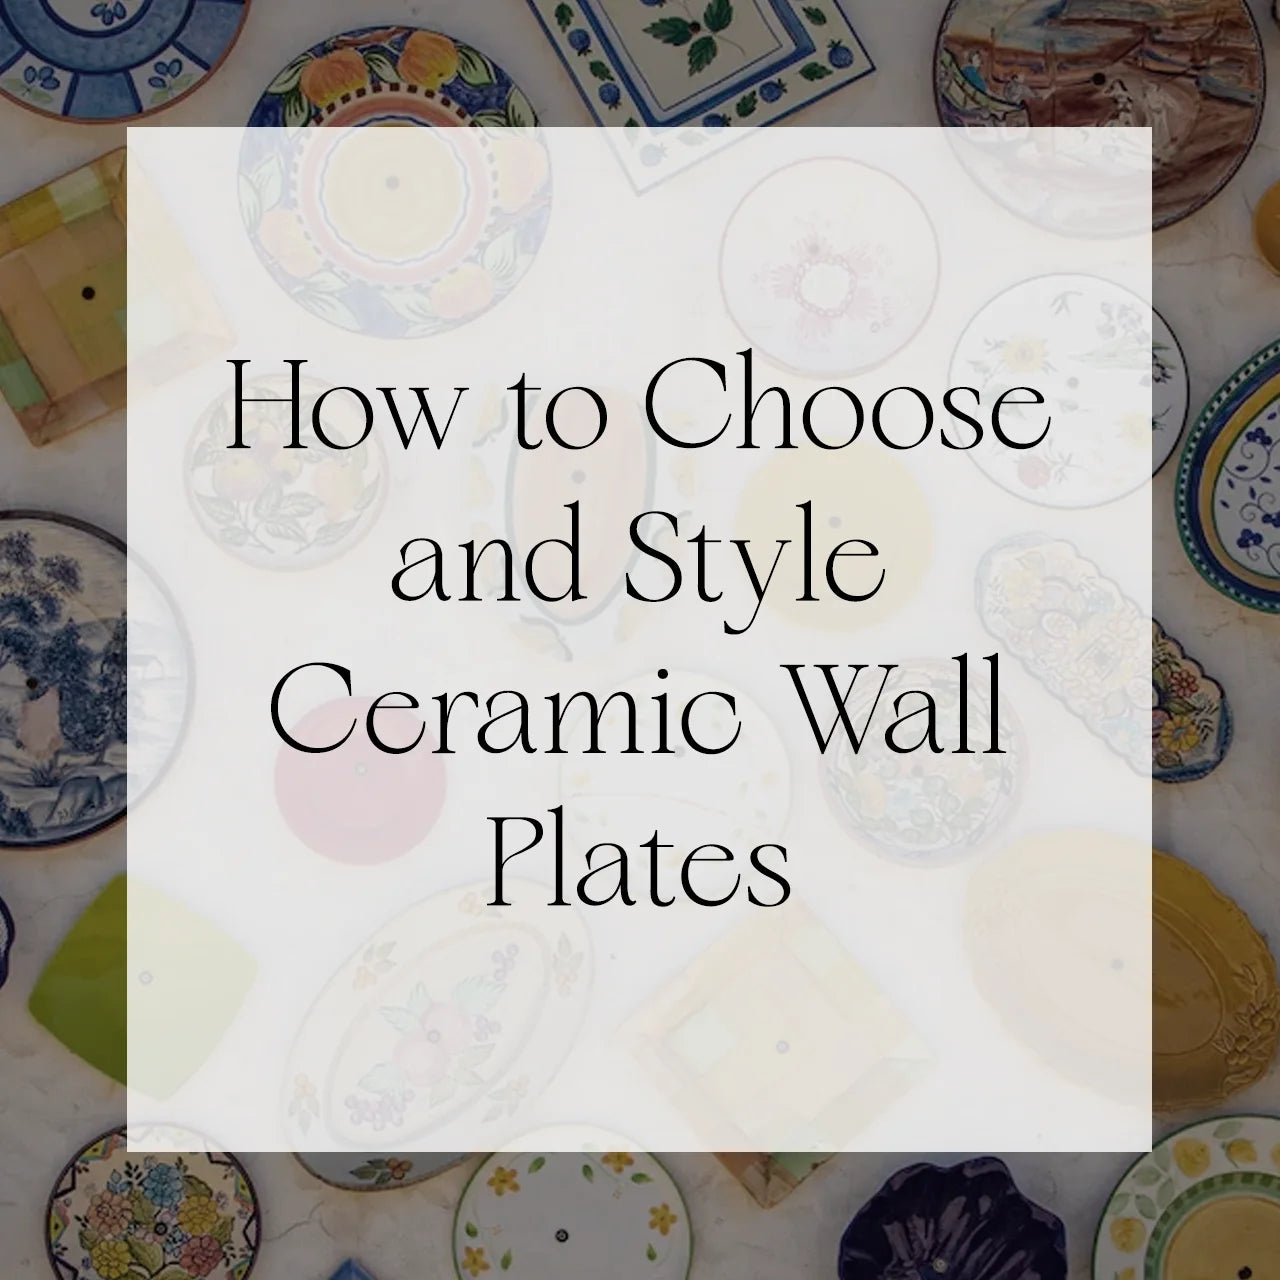 How to Choose and Style Ceramic Wall Plates